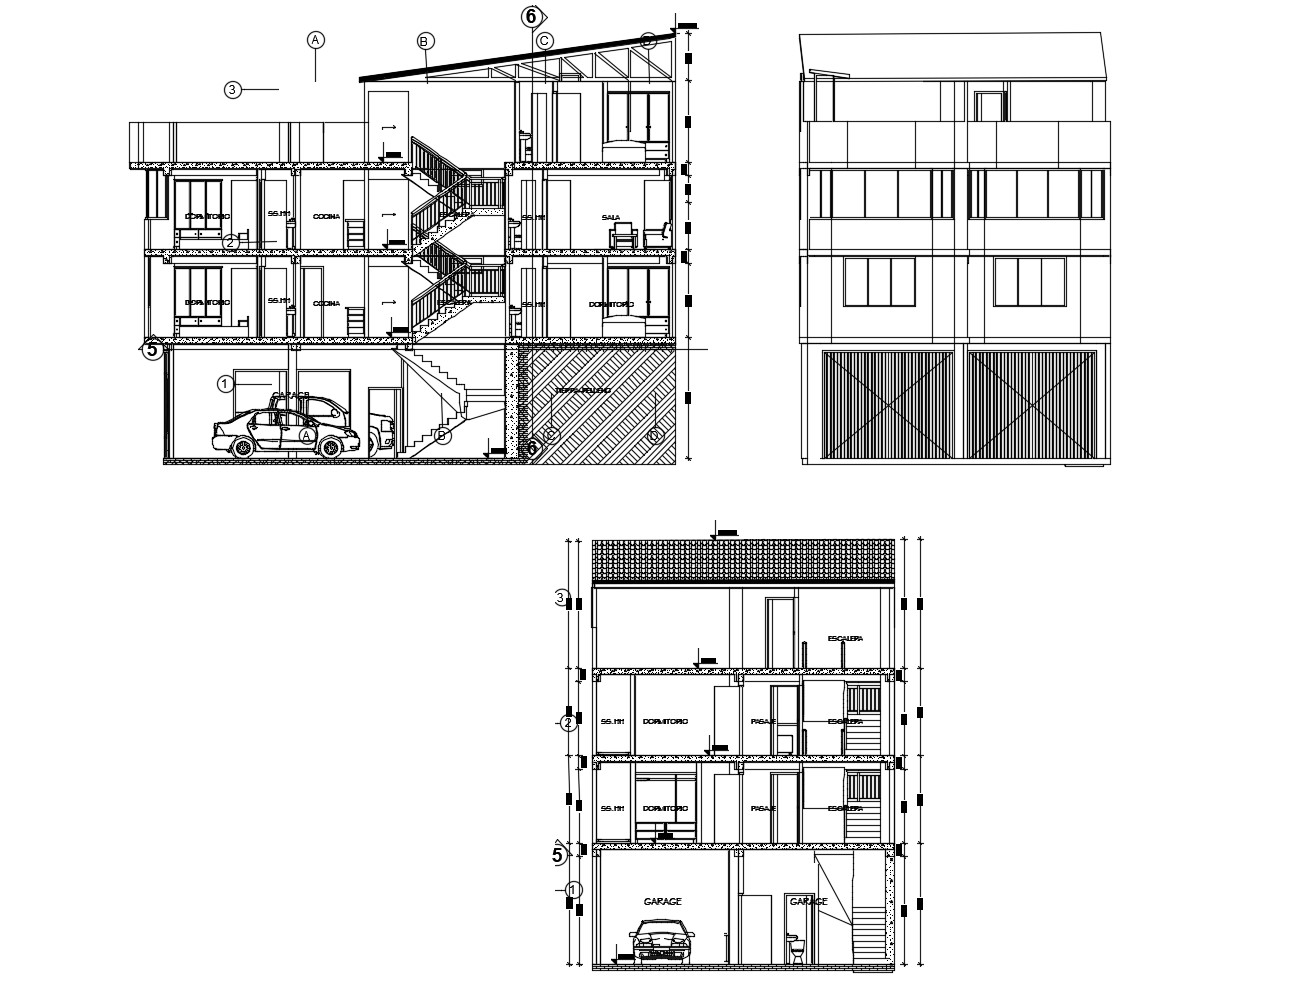 3 Storey House With Elevation Details In Autocad Cadbull